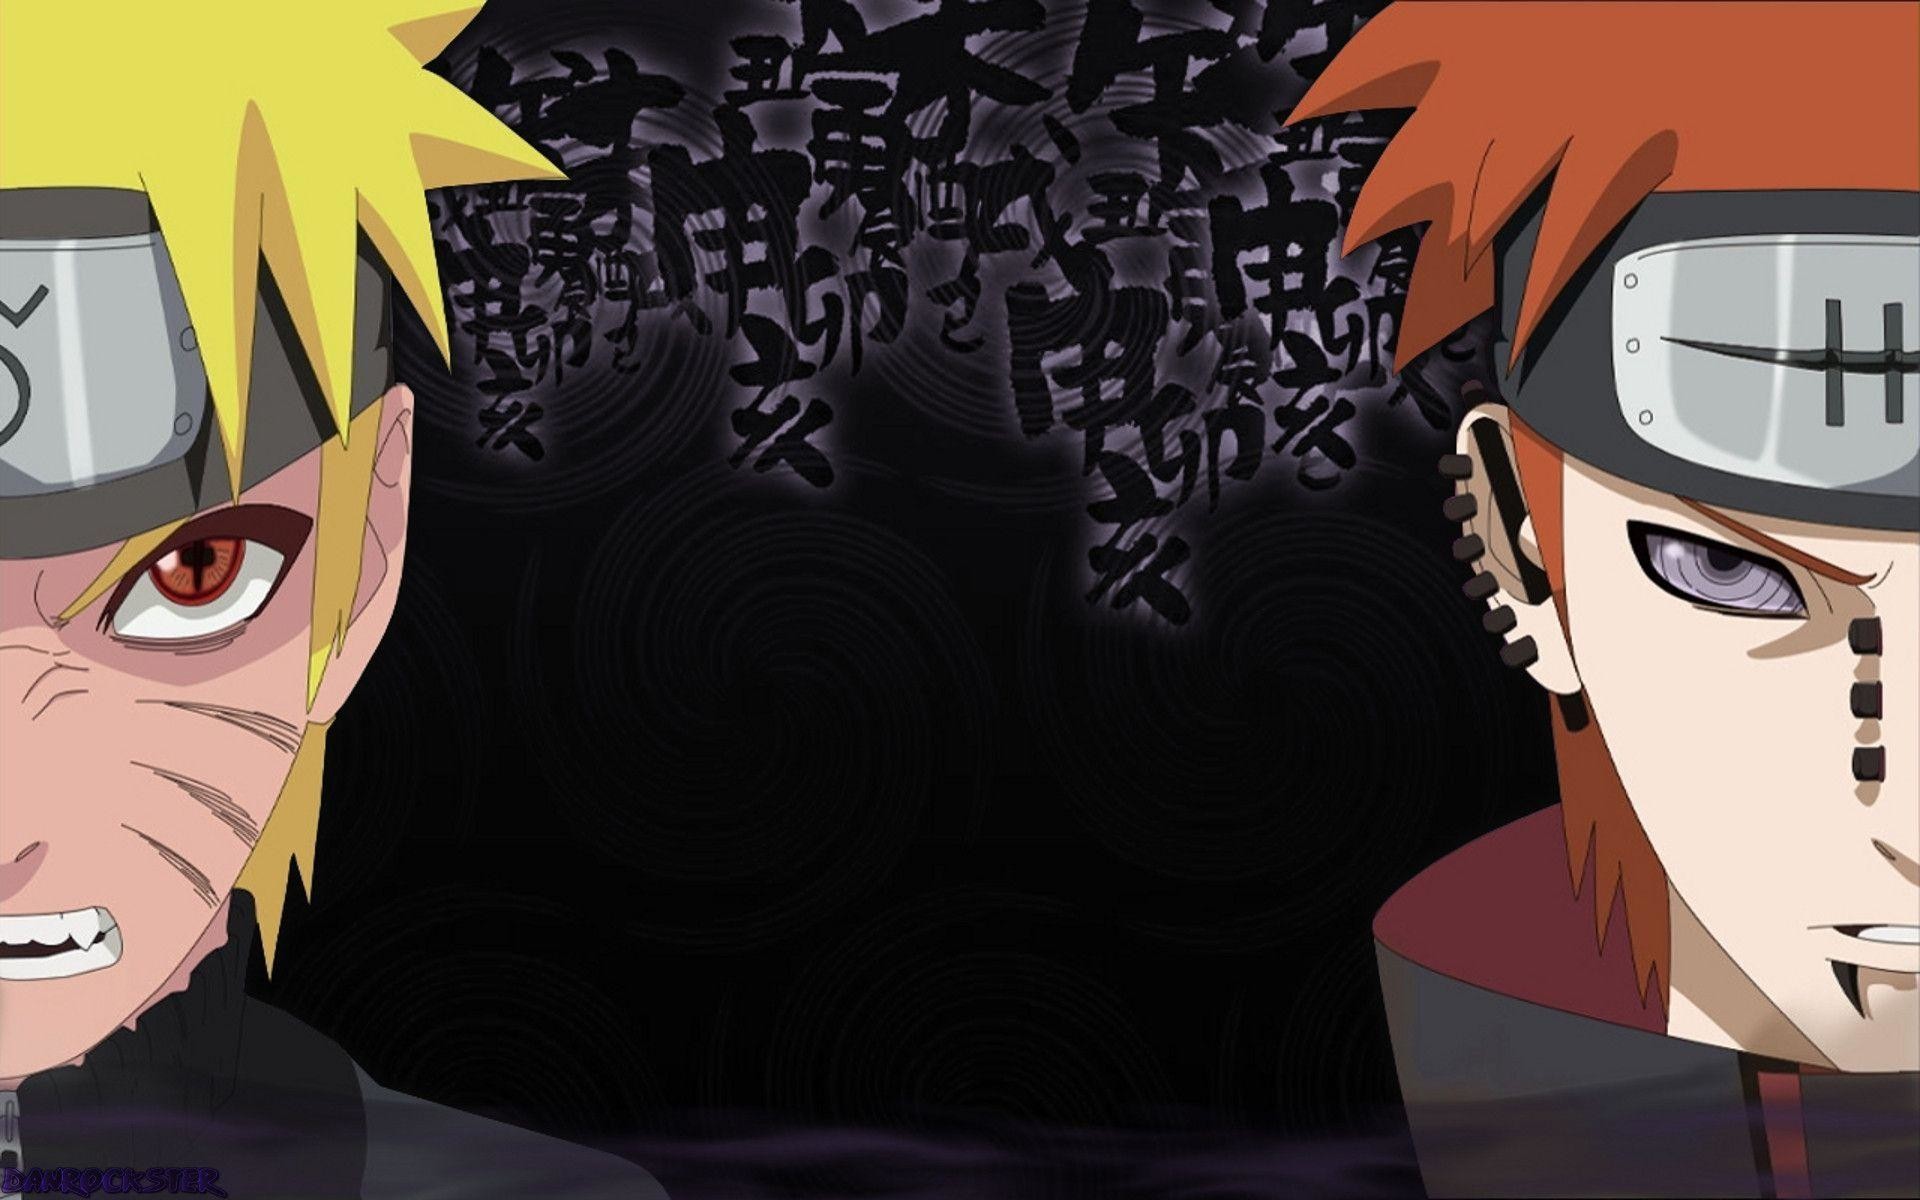 1920x1200 Most Downloaded Naruto Pain Wallpapers - Full HD wallpaper search